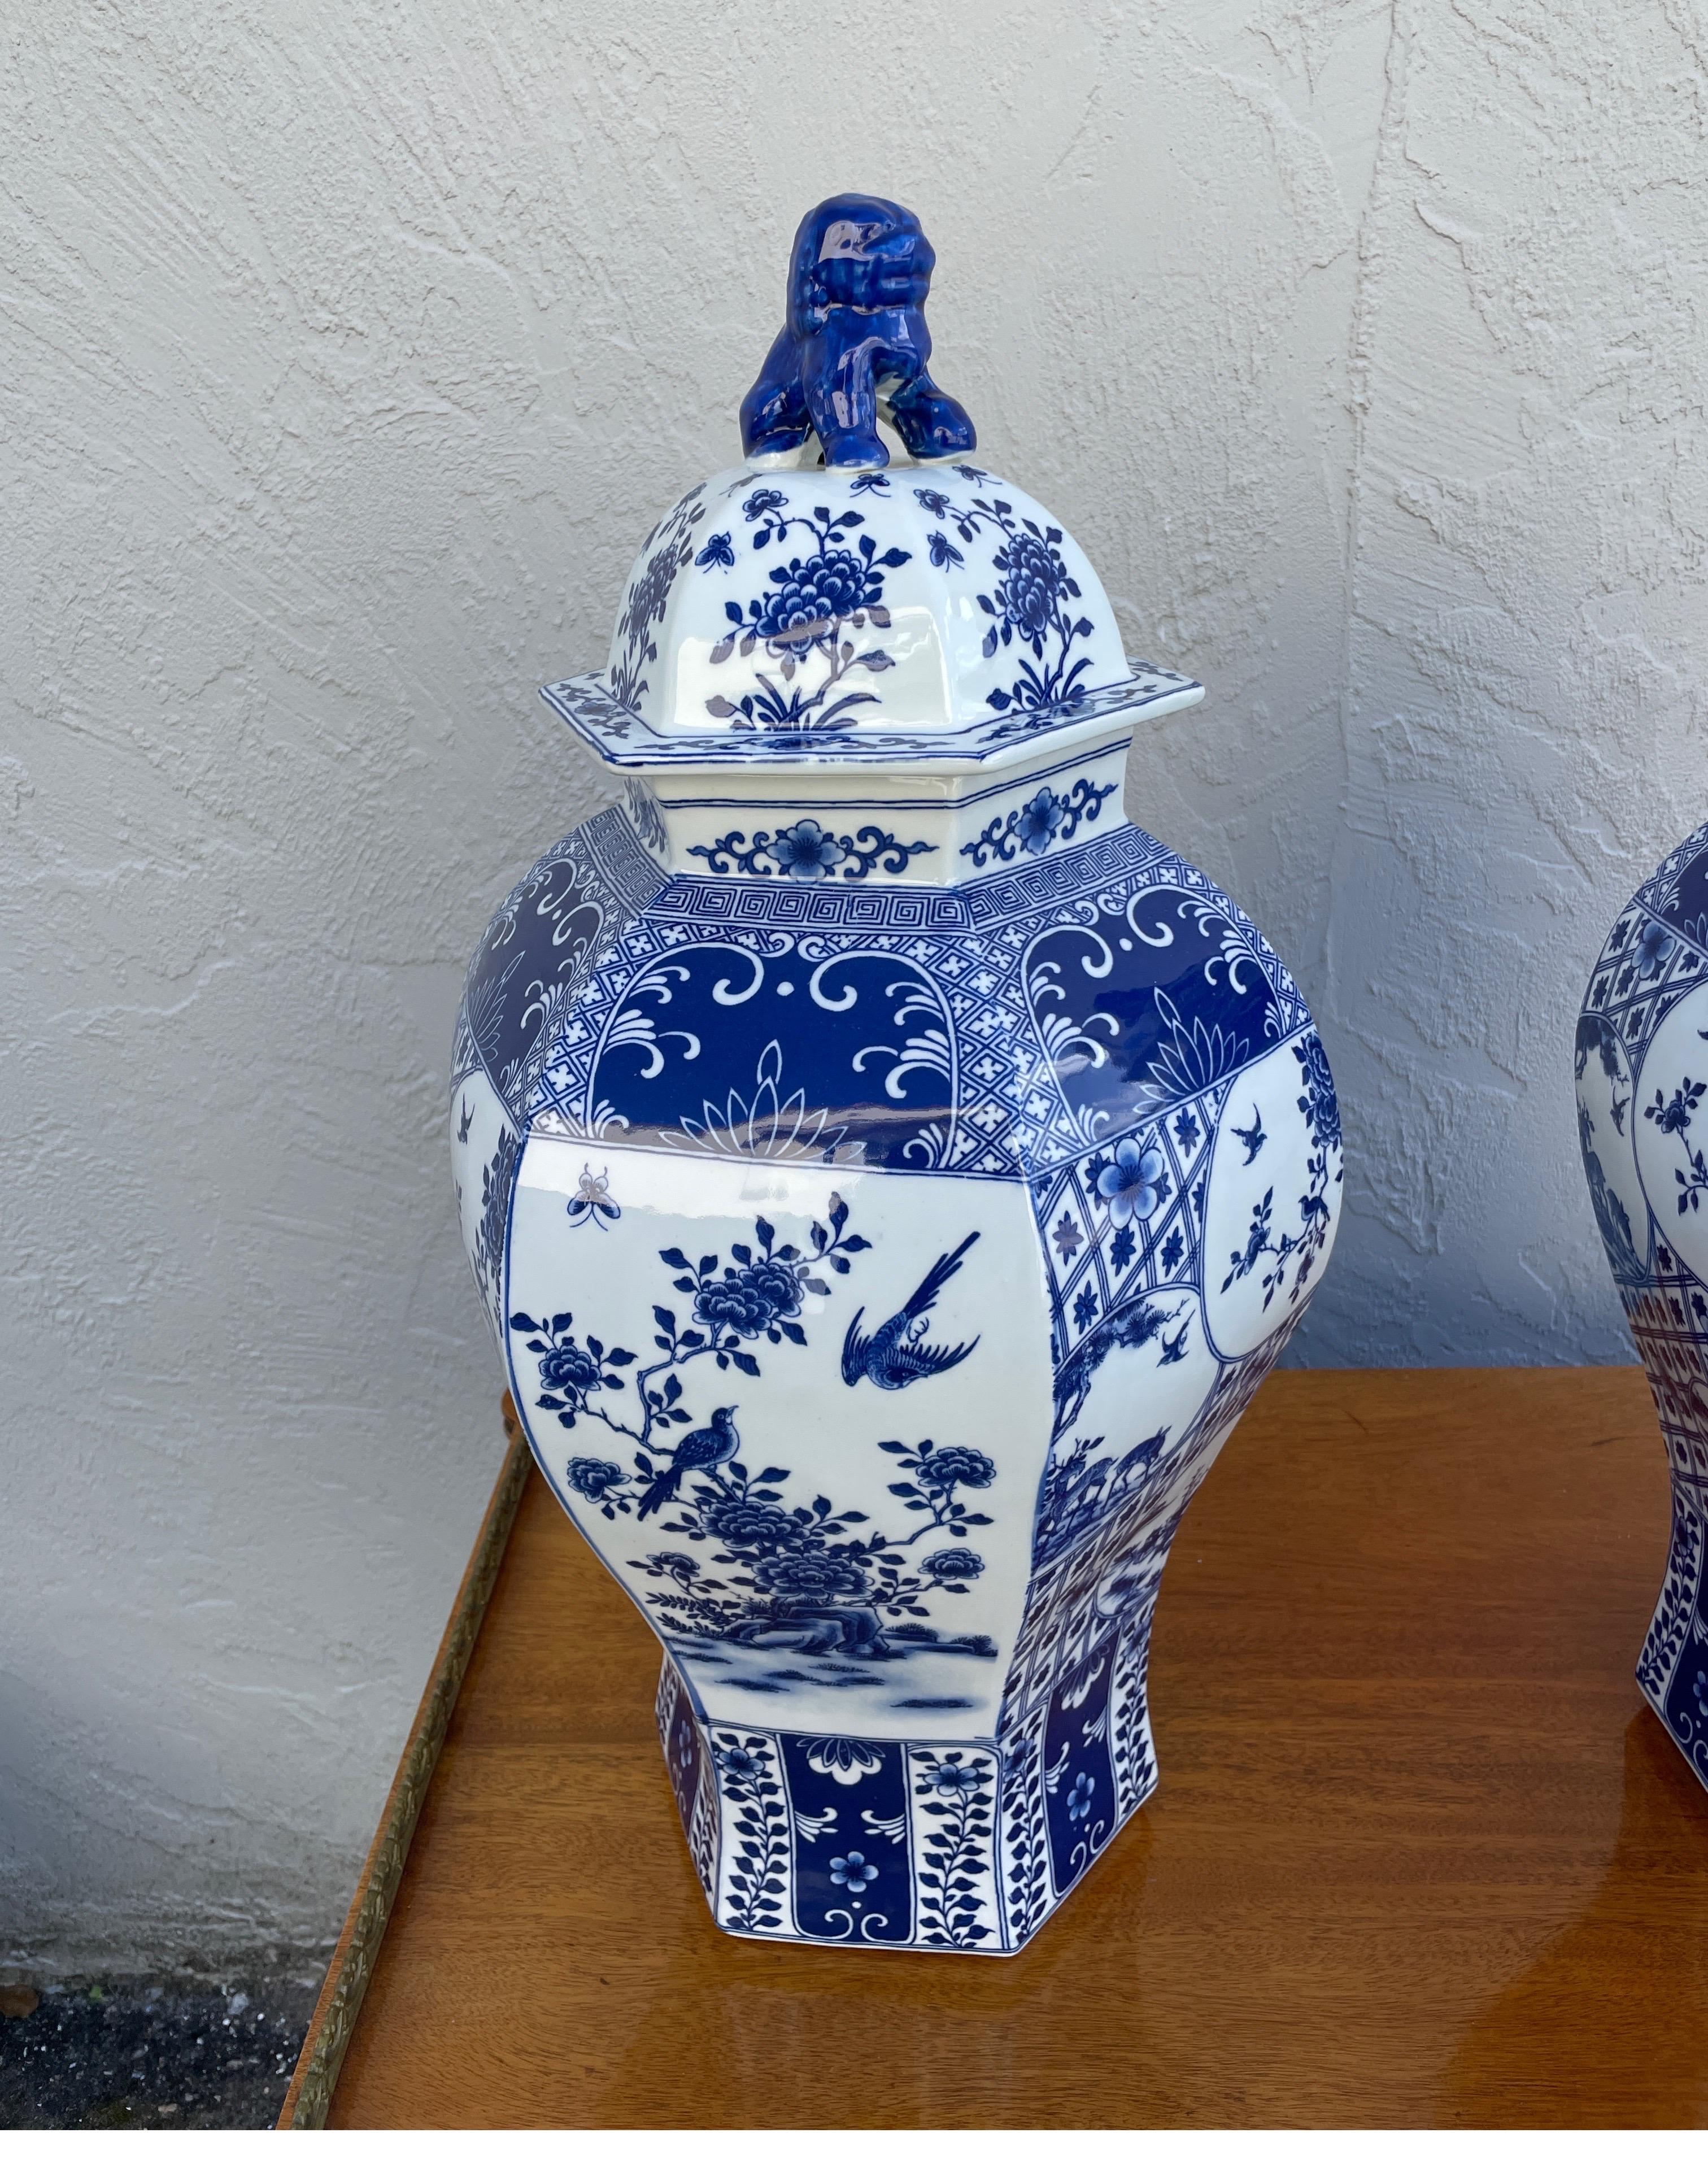 Large pair of blue & white Chinoiserie Ginger jars with foo dog lids. Very nice detail throughout.